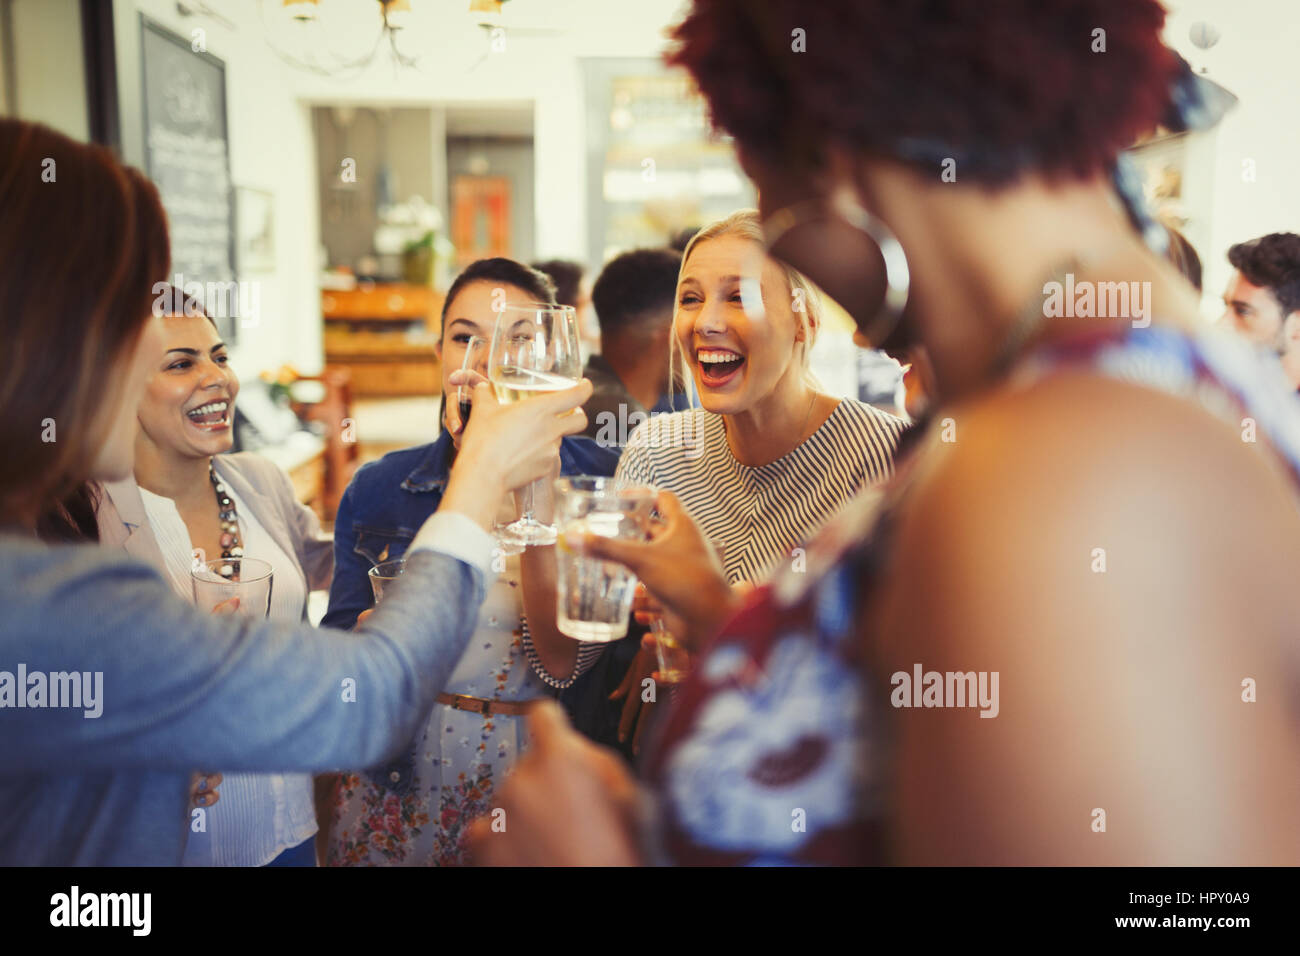 Enthusiastic women friends toasting wine glasses at bar Stock Photo